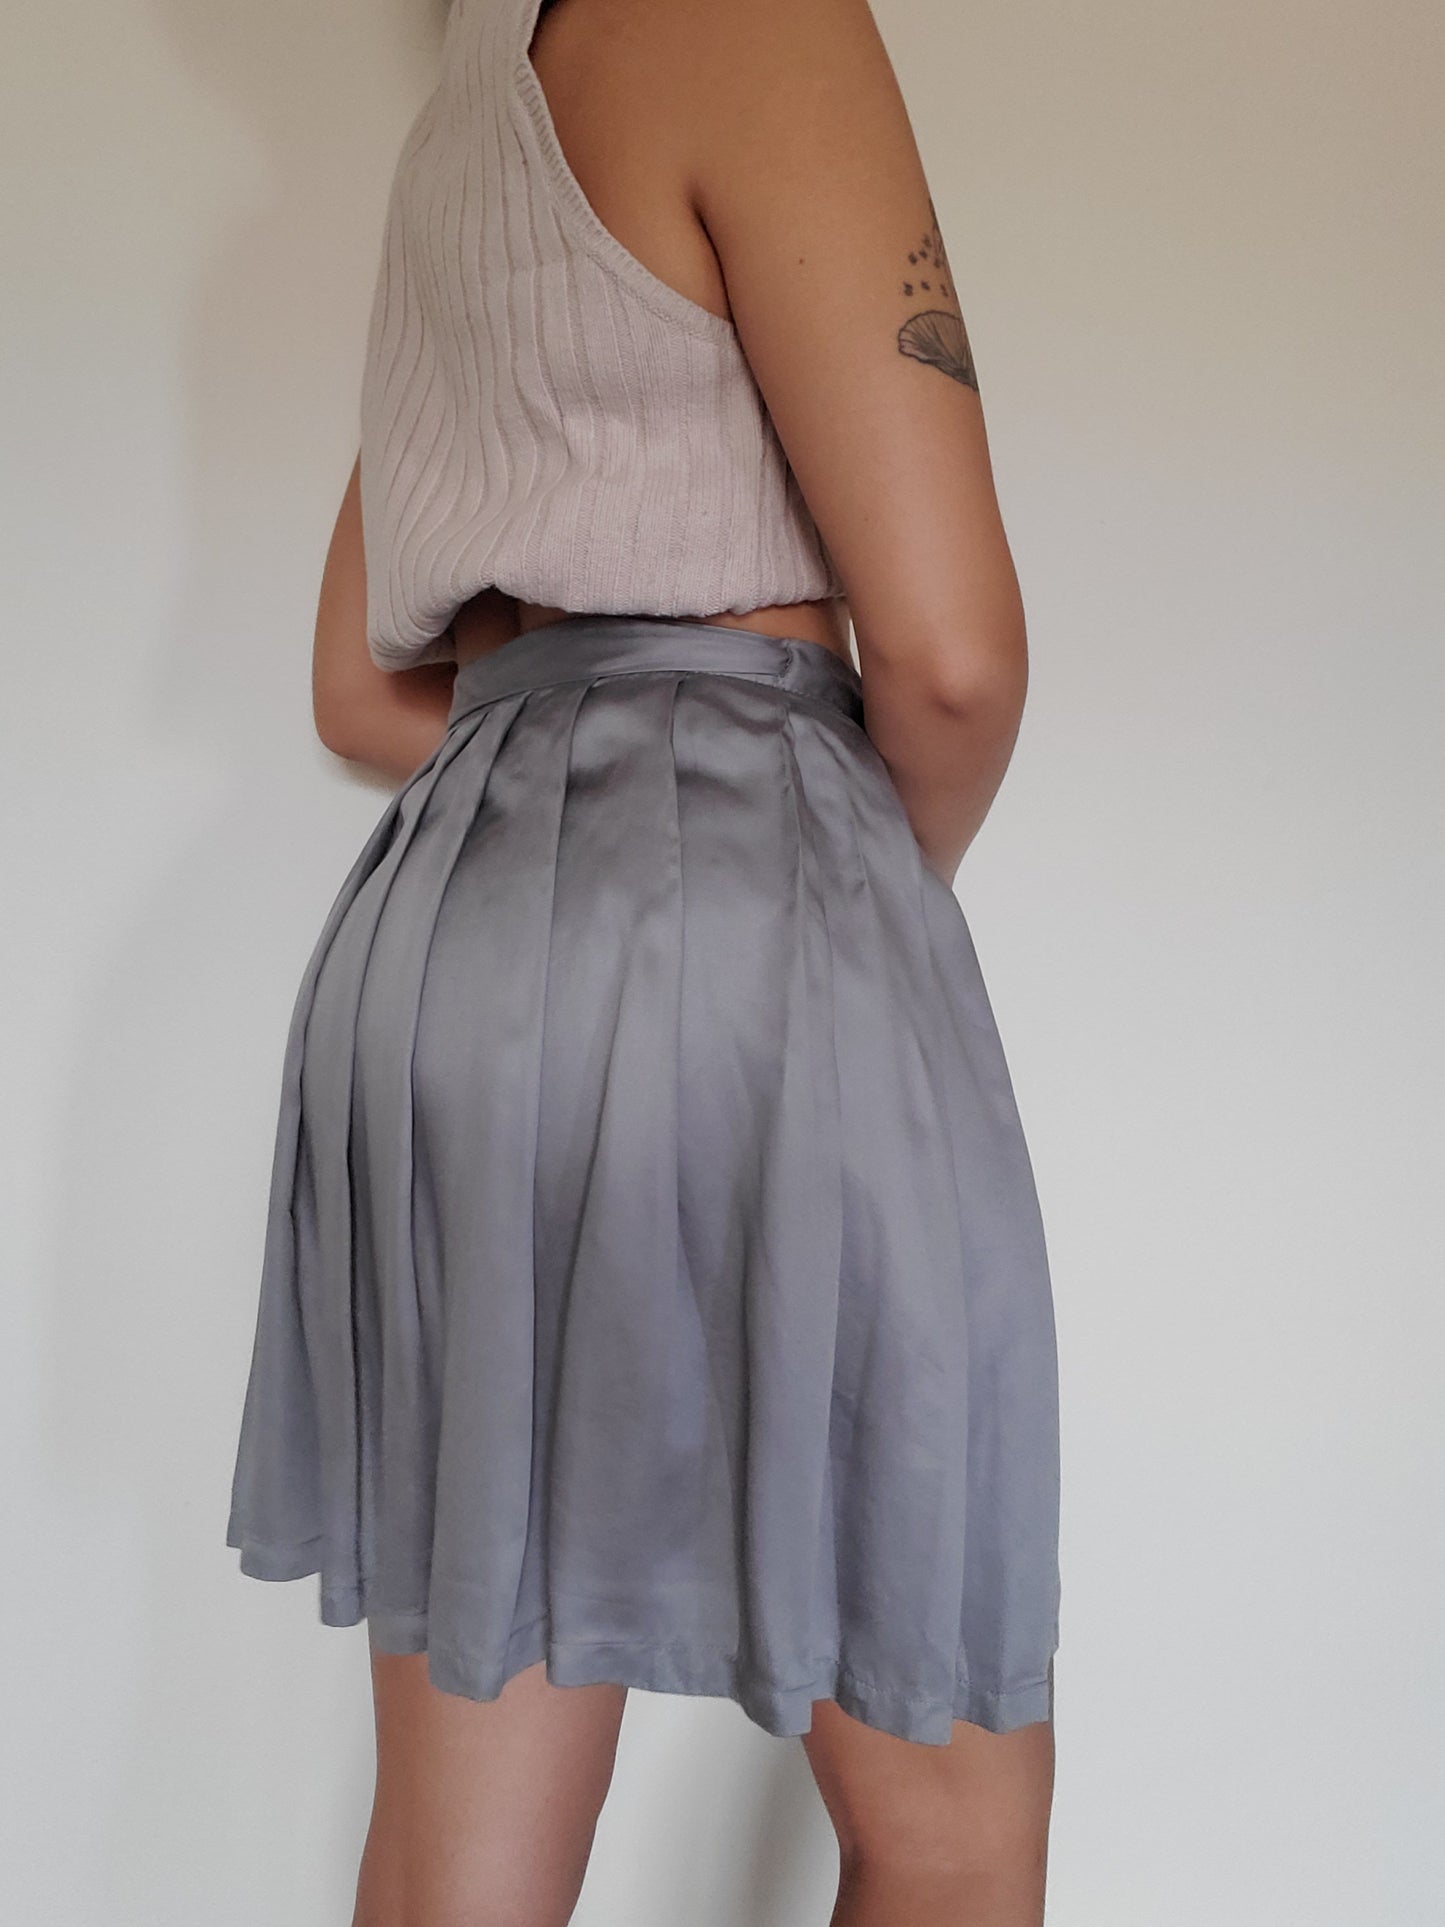 The Sisters Skirt